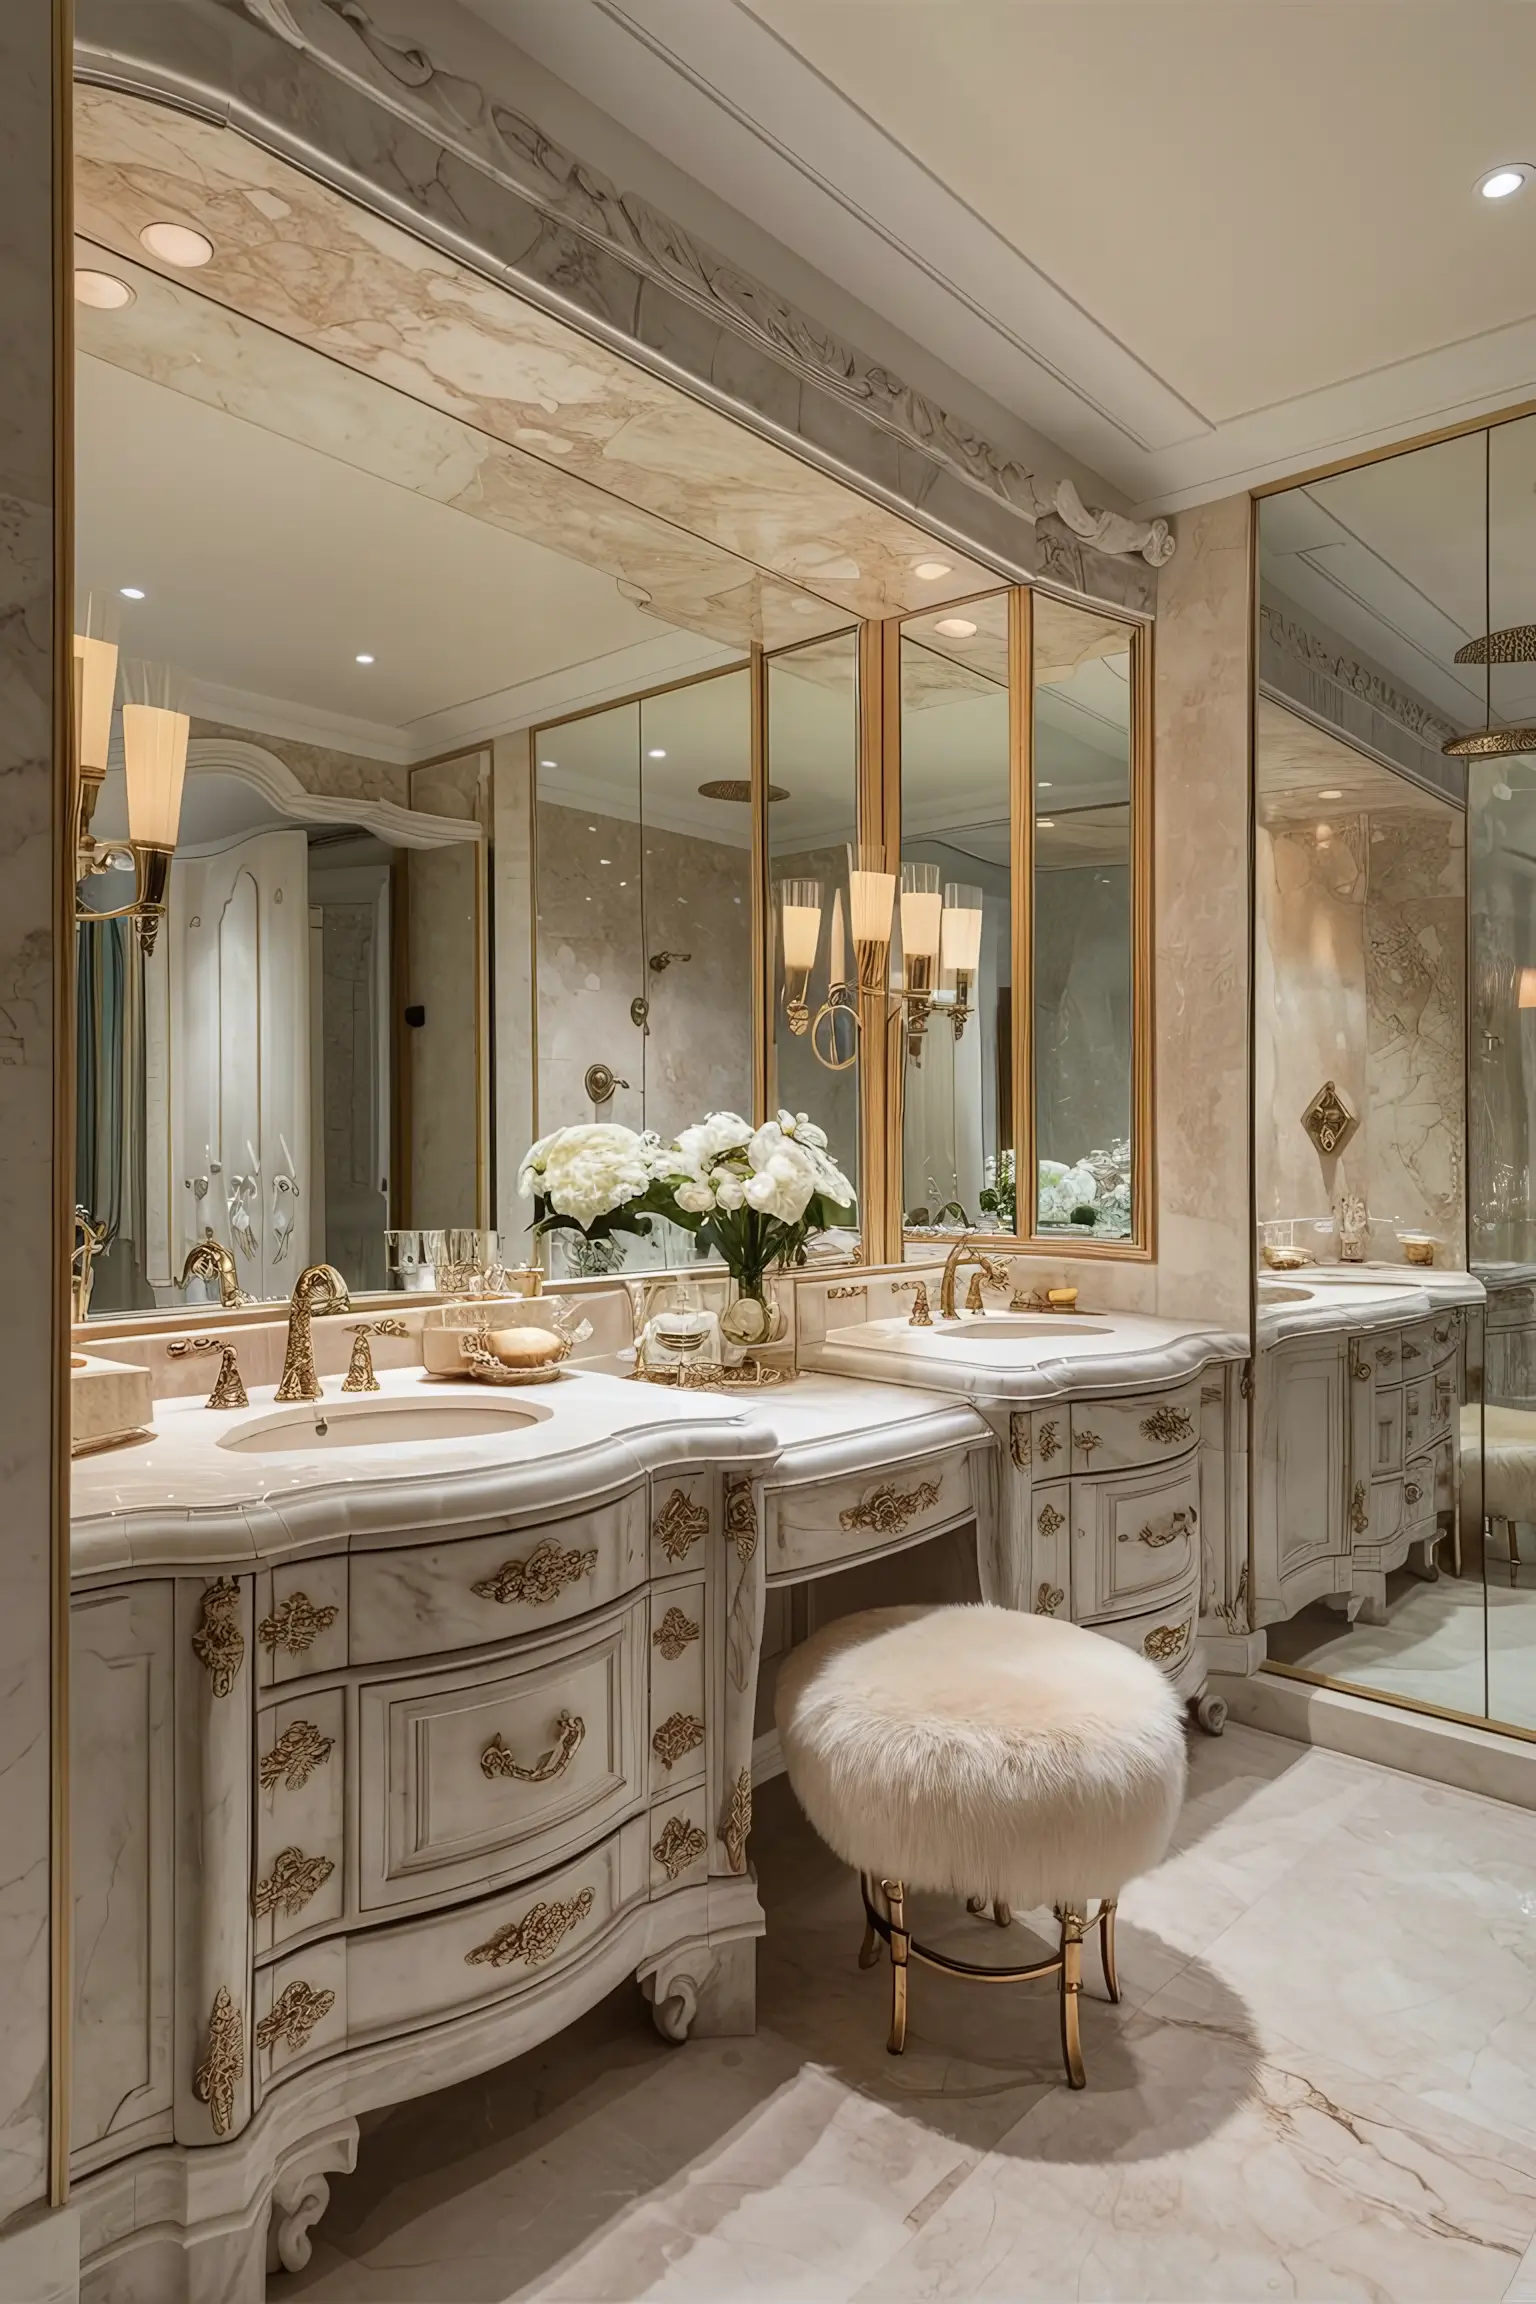 Elegant master bathroom with a luxurious vanity and sophisticated lighting.